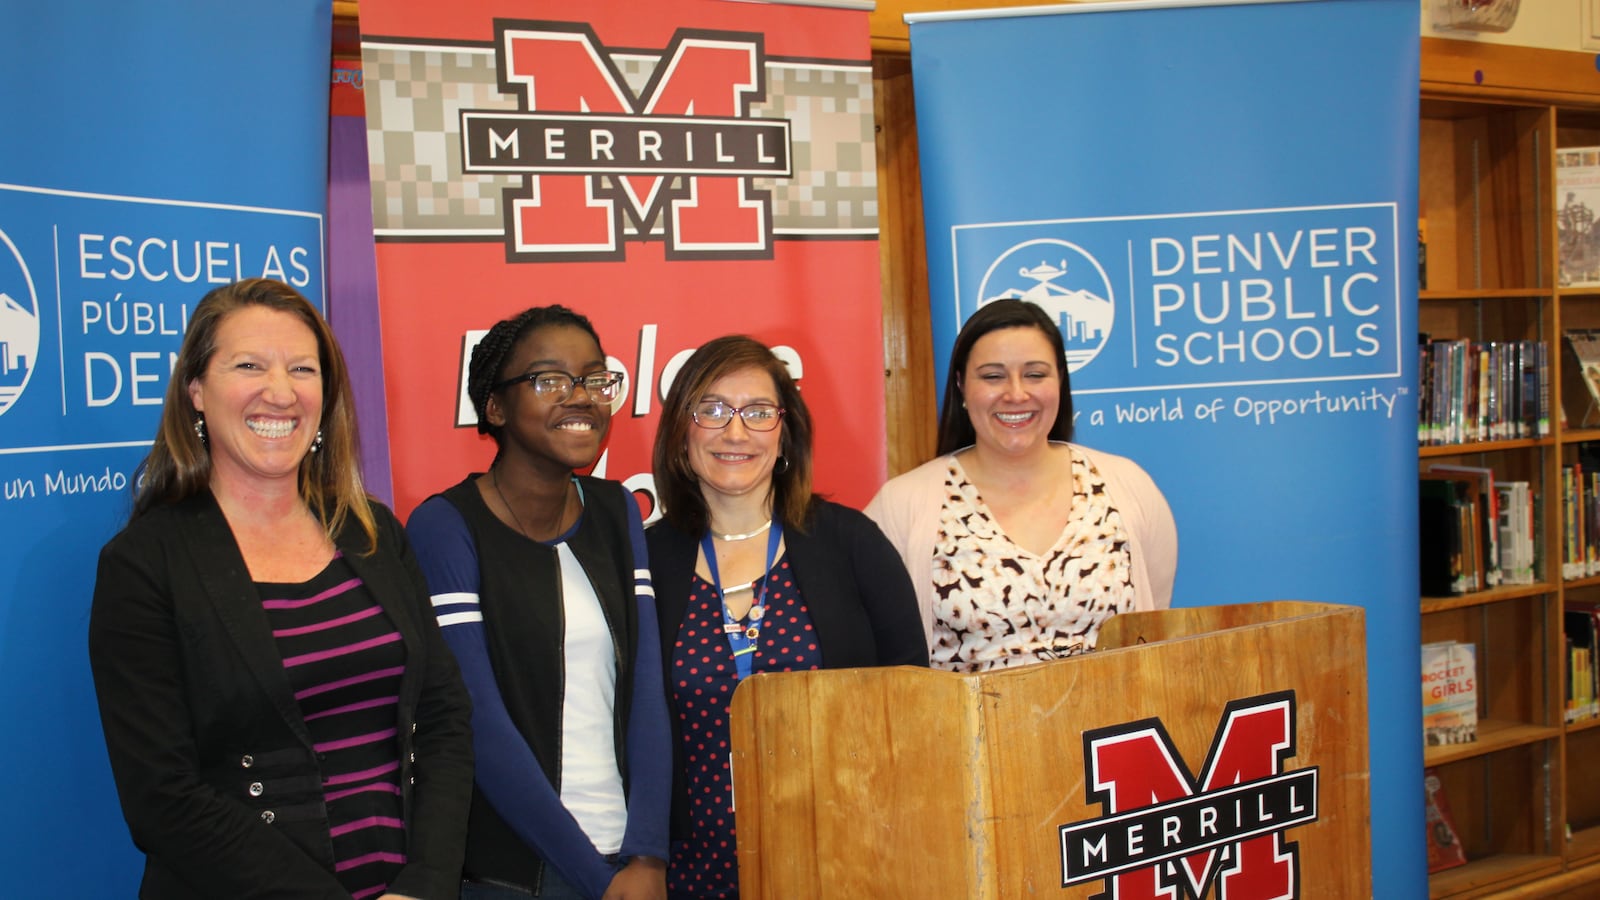 Parent Becky Wiggins and student Jael Iyema joined Susana Cordova, DPS deputy superintendent and Christina Sylvester, principal of Merrill Middle School for a press event about school choice.